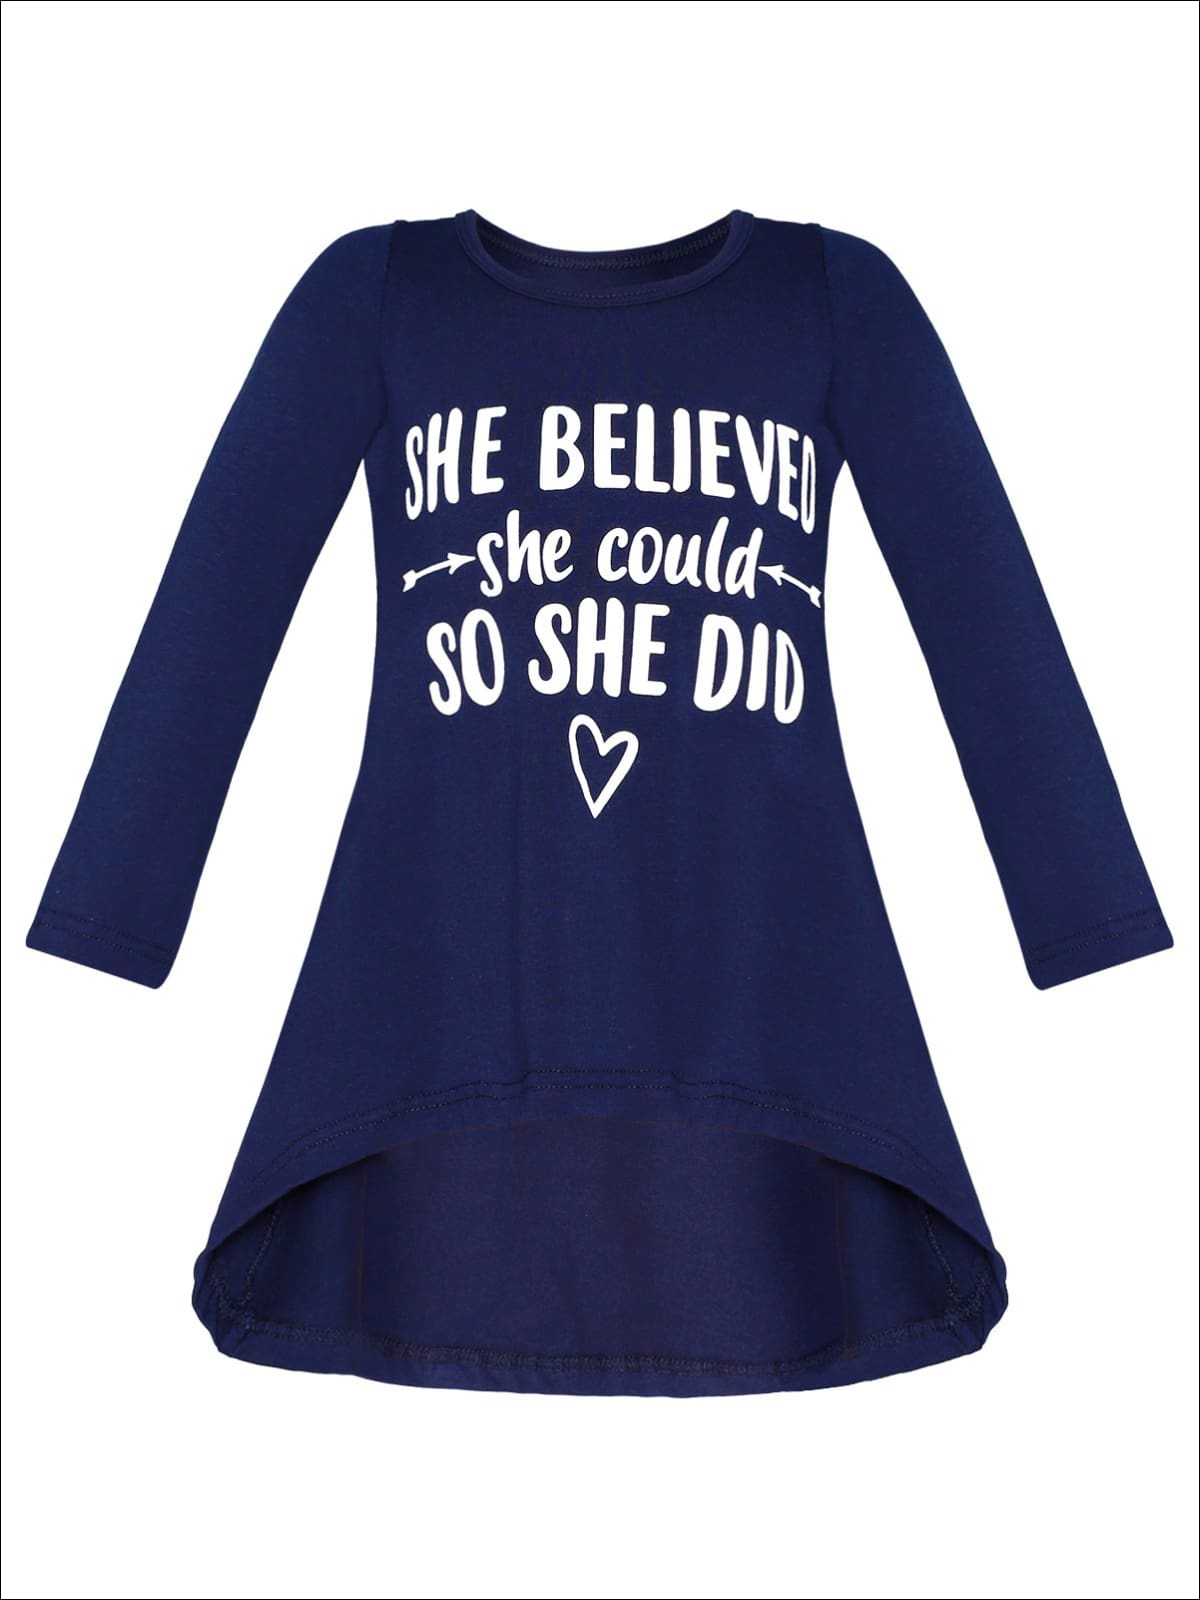 Girls She Believed She Could So She Did Hi-Lo Long Sleeve Graphic Statement Top - Navy / 2T/3T - Girls Fall Top